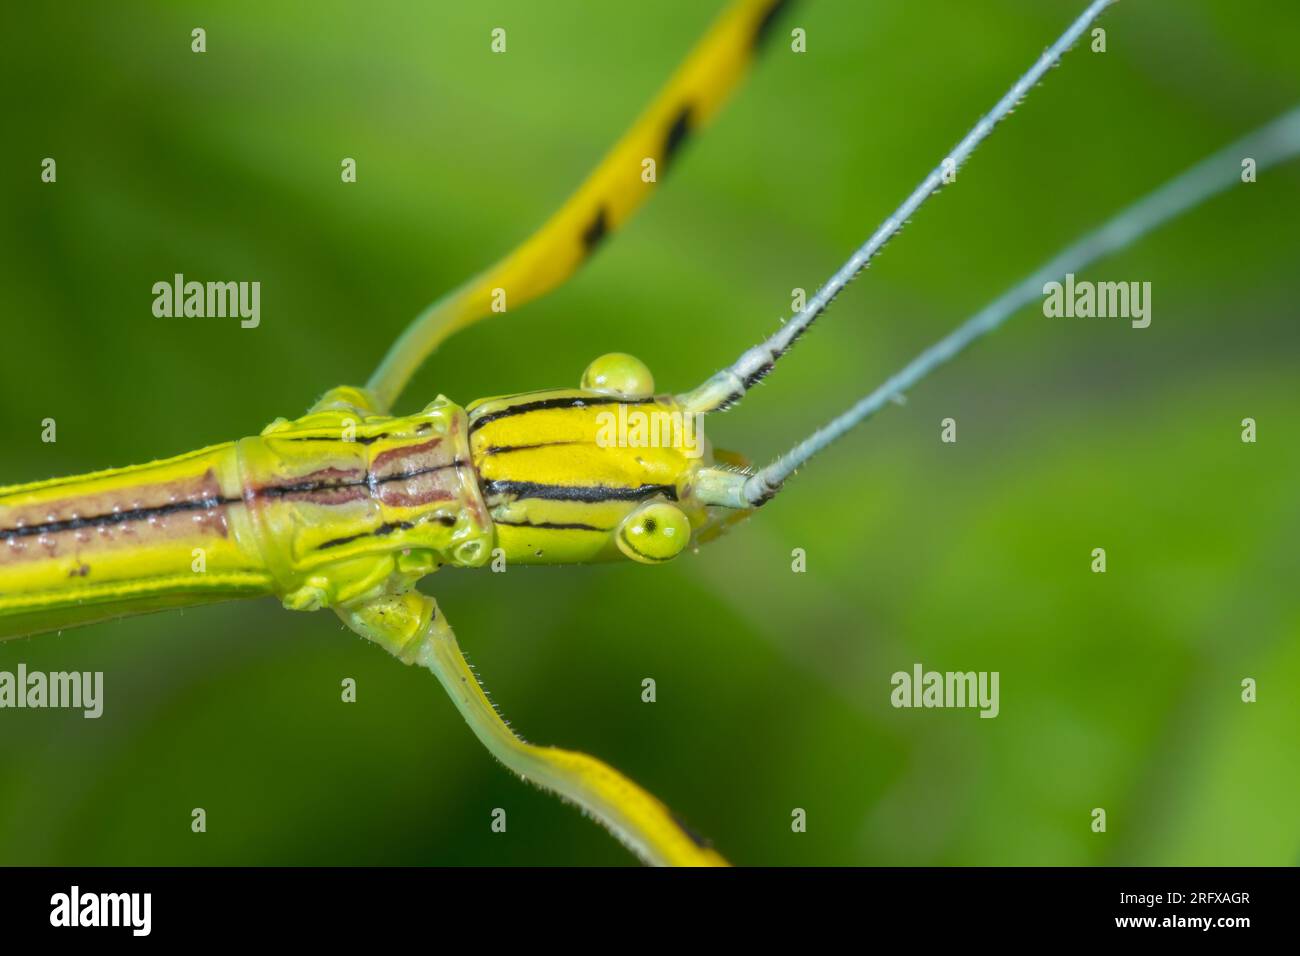 Malaysian Pink Winged Stick Insect (Anarchodes / Necroscia annulipes). Phasmidae Stock Photo